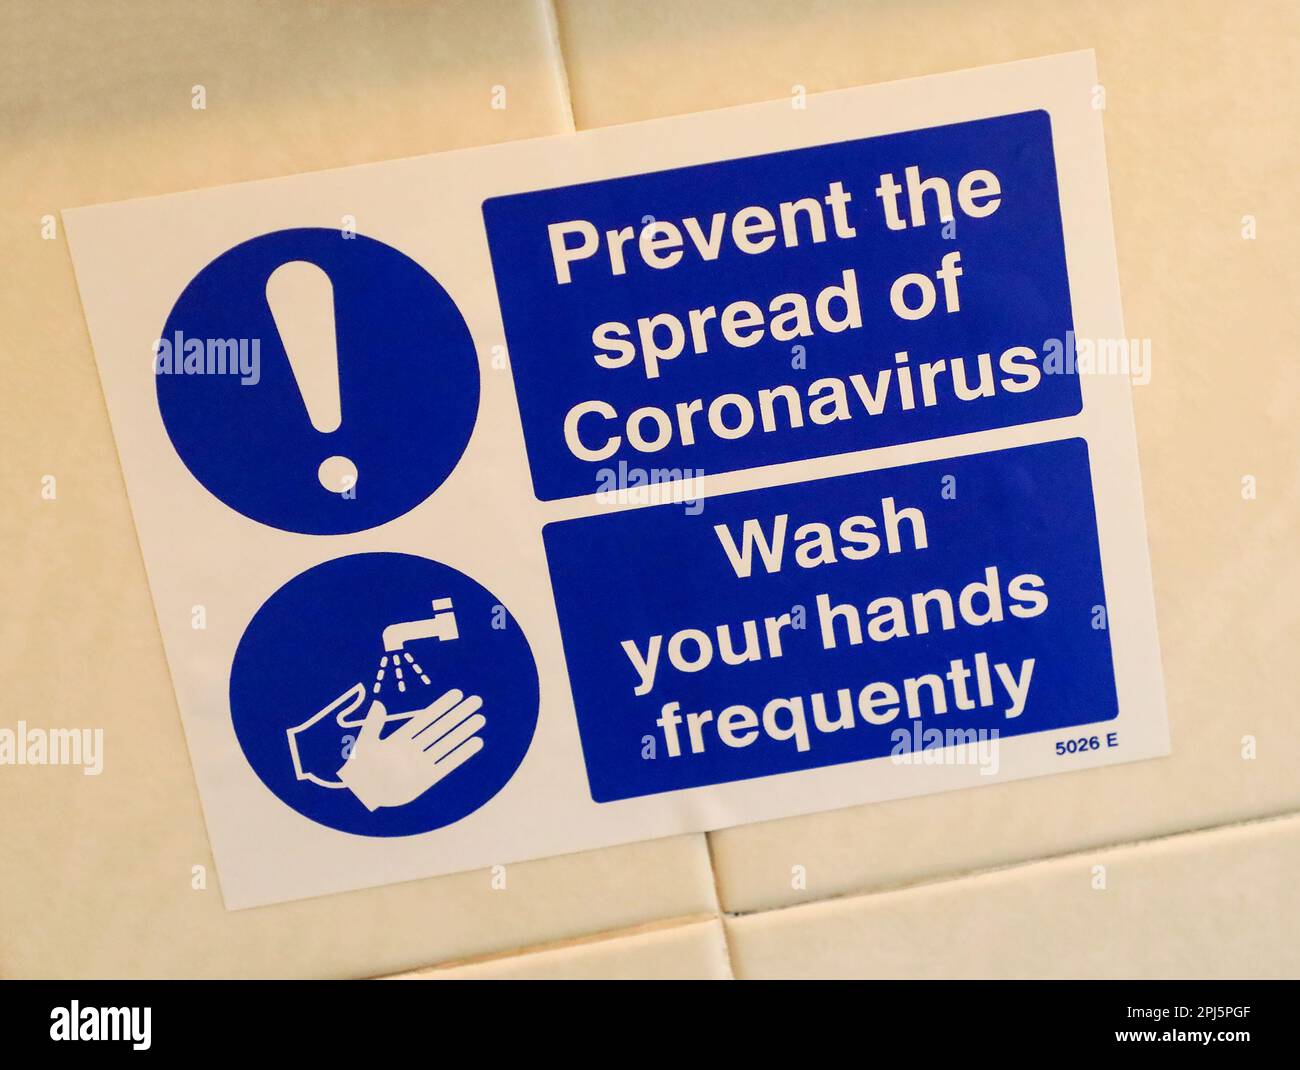 A sign saying 'Prevent the spread of Coronavirus' or Covid-19 and 'Wash your hands frequently', England, UK Stock Photo